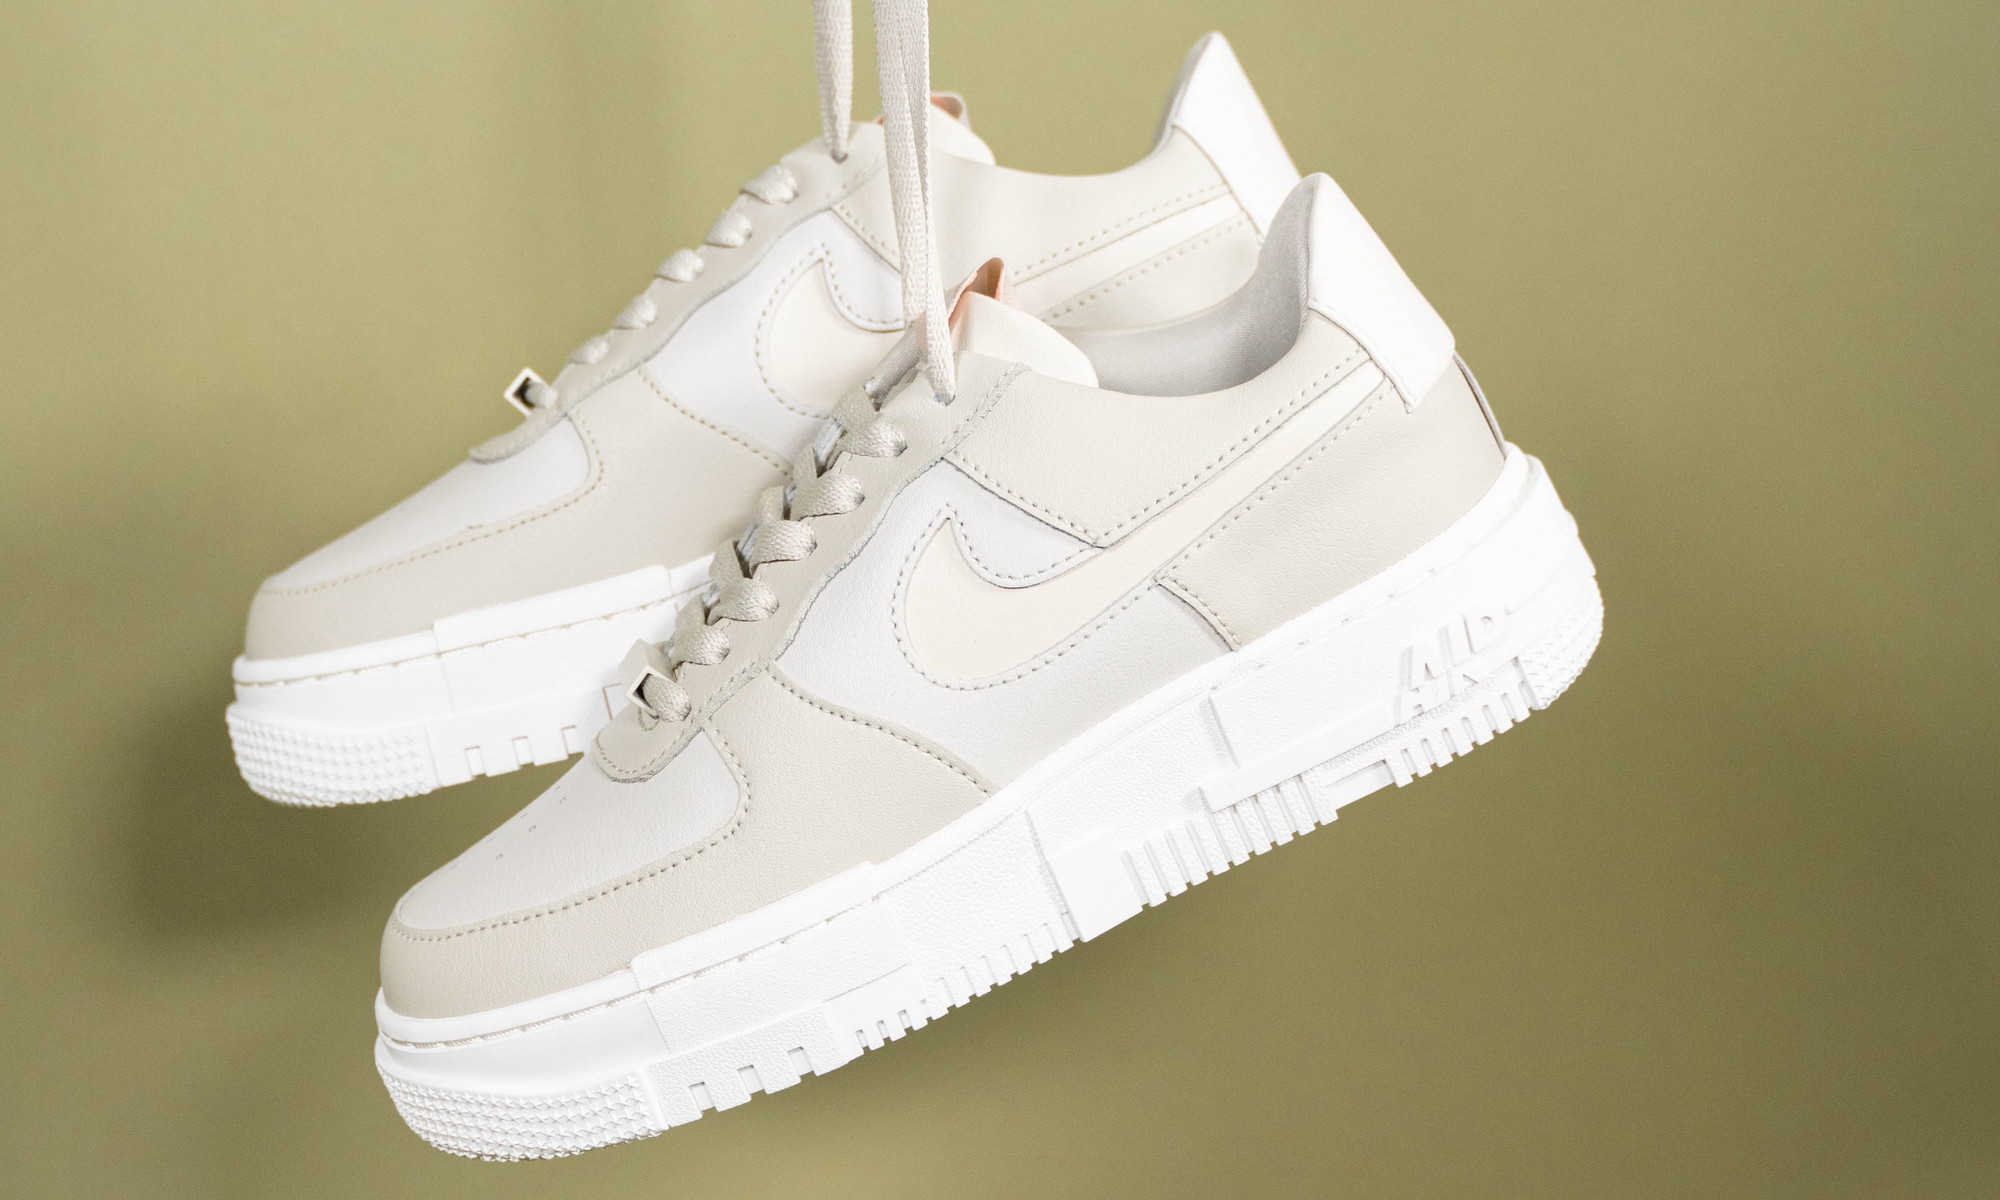 WMNS Sommer Styling mit dem Nike Air Force 1 Pixel